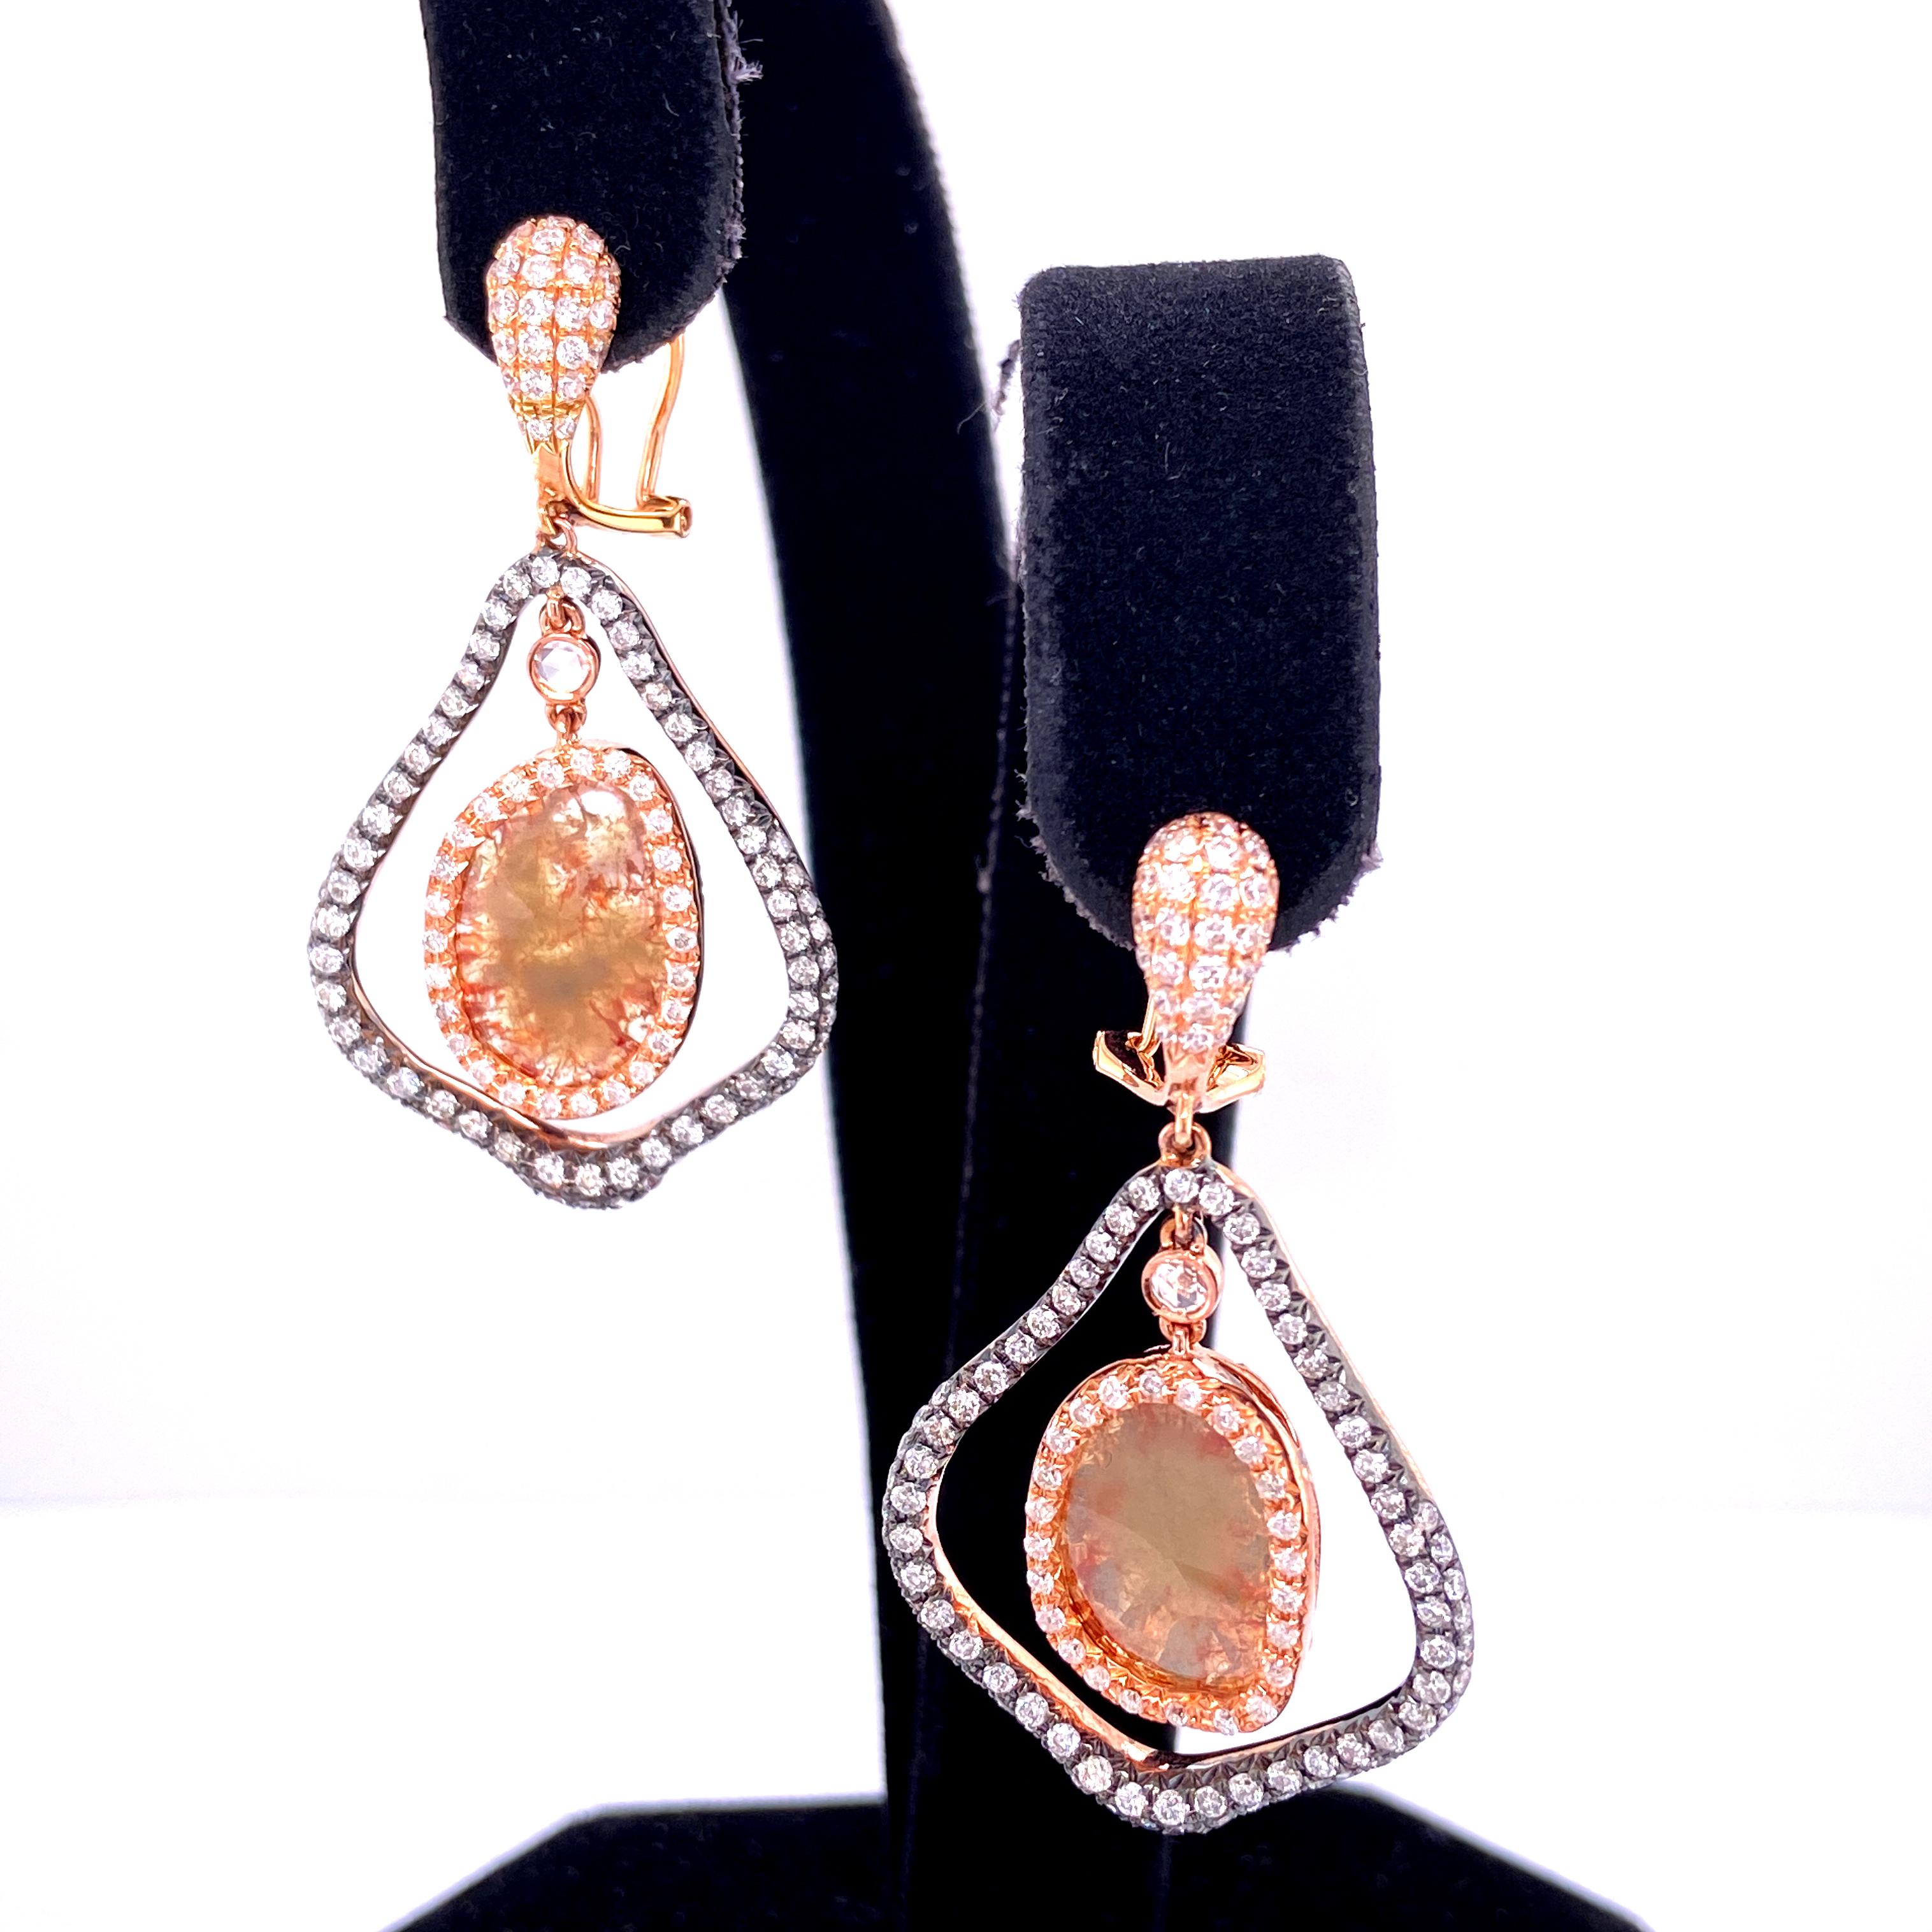 Natural Fancy Coloured Diamond and White Diamond Yellow Gold Earrings:

A unique pair of earrings, it features two natural fancy coloured diamond slices weighing 3.04 carat, surrounded by 2.30 carat of white round brilliant diamonds. The fancy